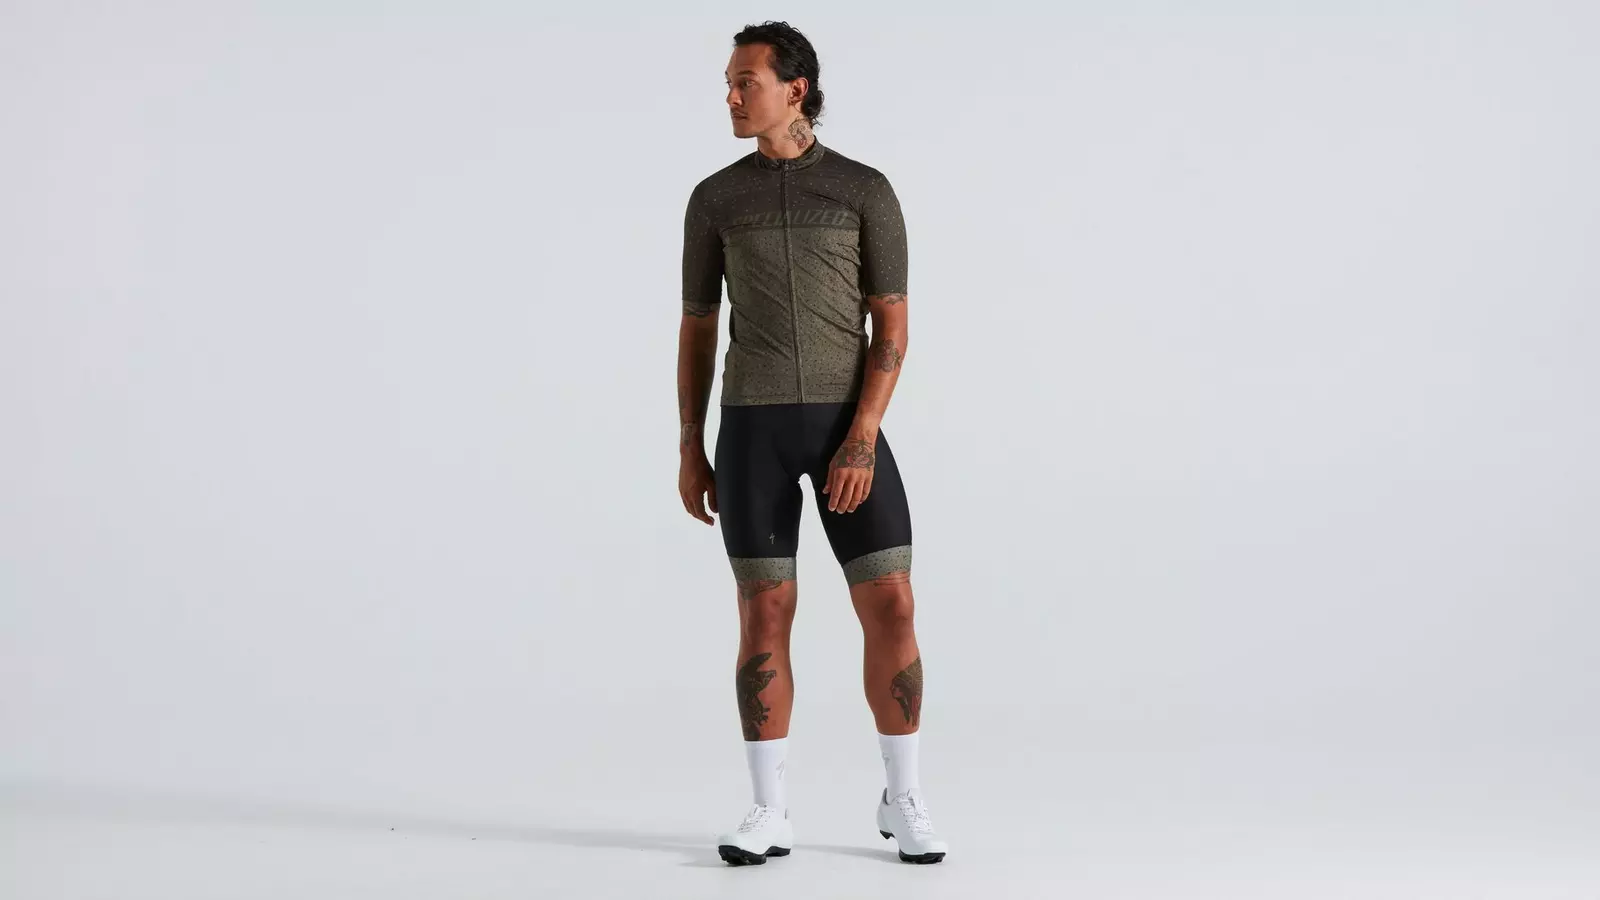 Maillot manches courtes Homme Specialized - RBX Logo - Vélo dayak